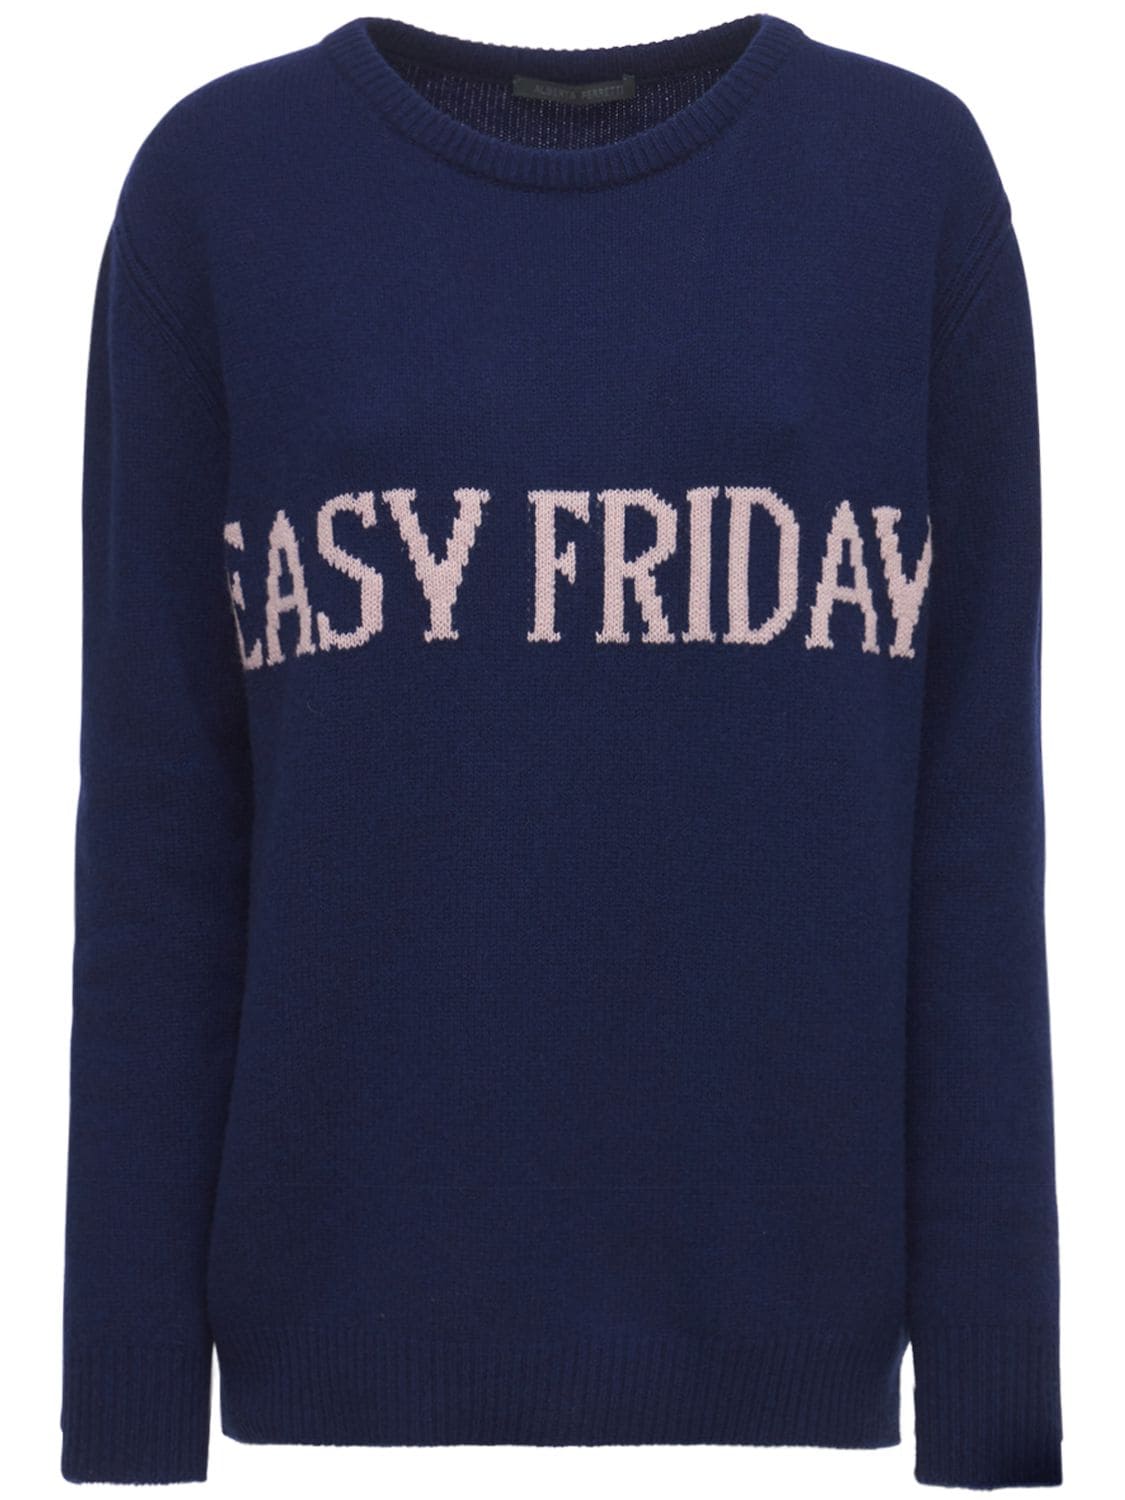 Easy Friday Cashmere Blend Sweater